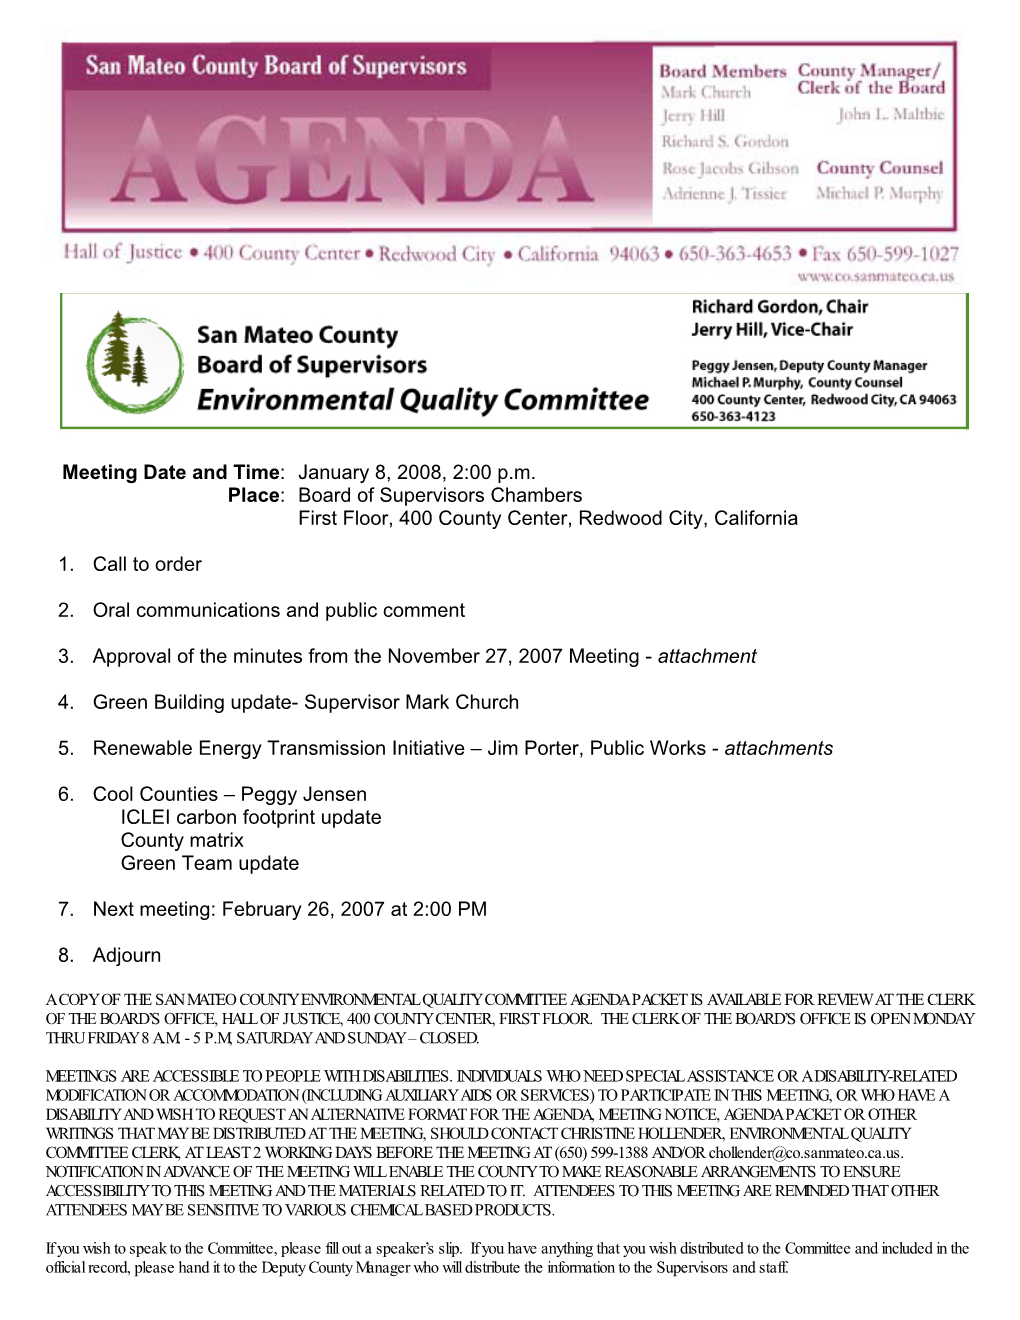 Meeting Date and Time: January 8, 2008, 2:00 P.M. Place: Board of Supervisors Chambers First Floor, 400 County Center, Redwood City, California